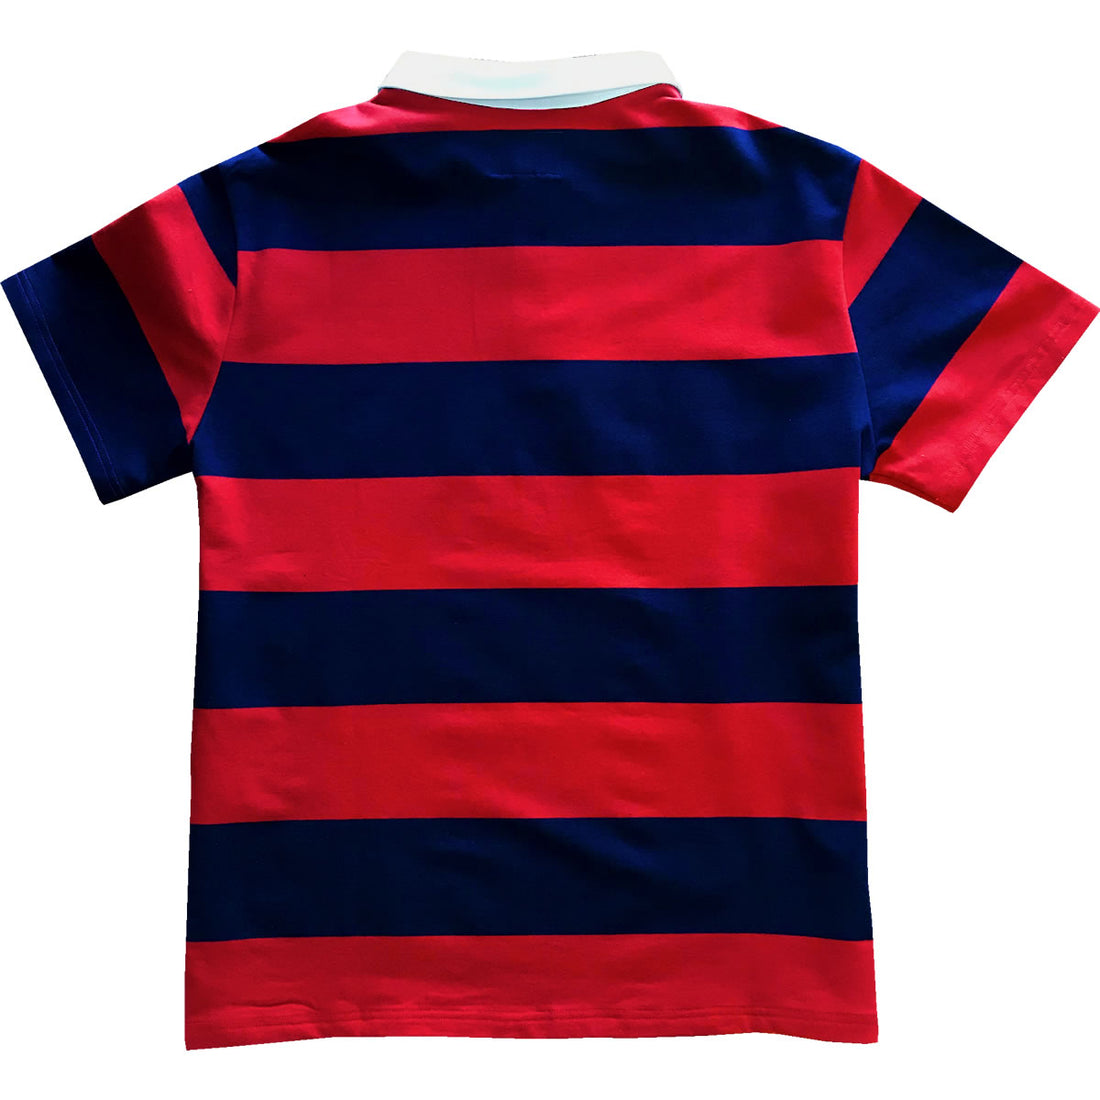 Navy Blue and Red Short Sleeve Striped Men's Rugby Shirt Back